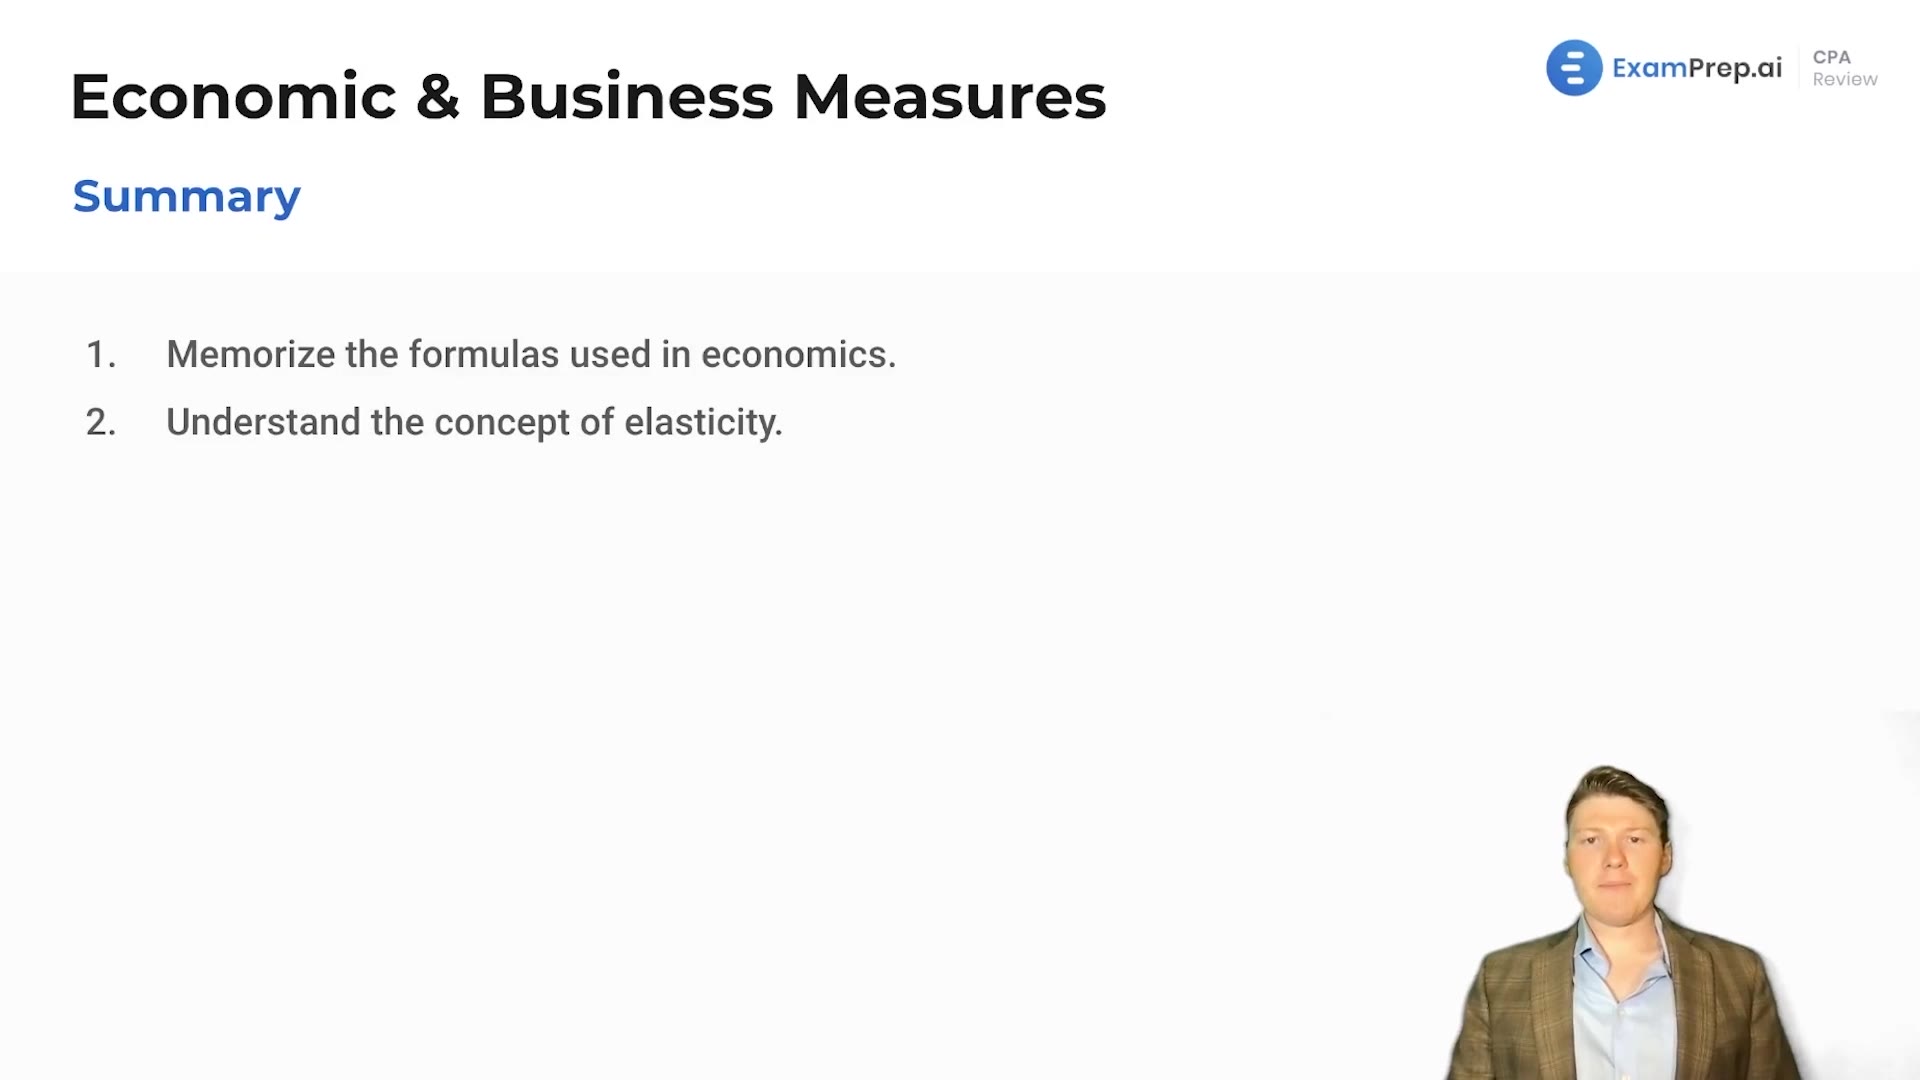 Economic and Business Measures Summary lesson thumbnail